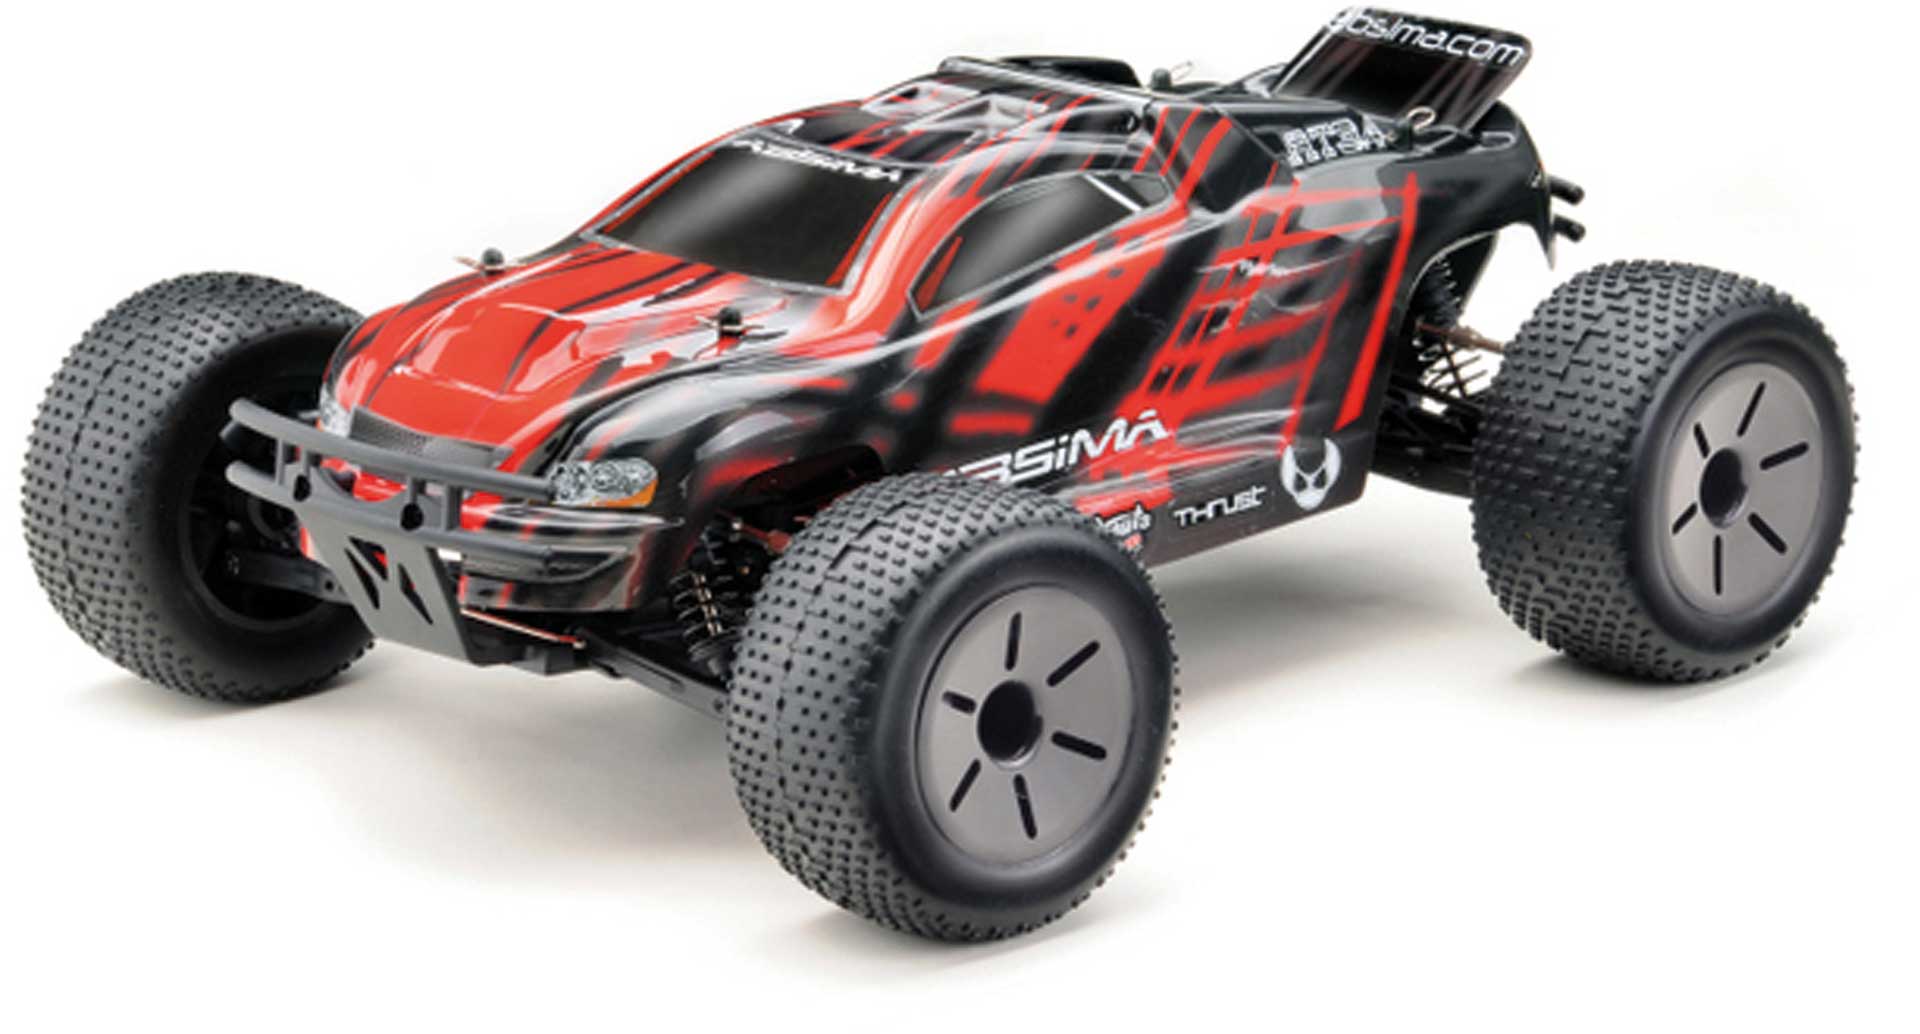 ABSIMA AT3.4 TRUGGY RTR 4WD RACE TRUCK 1/10